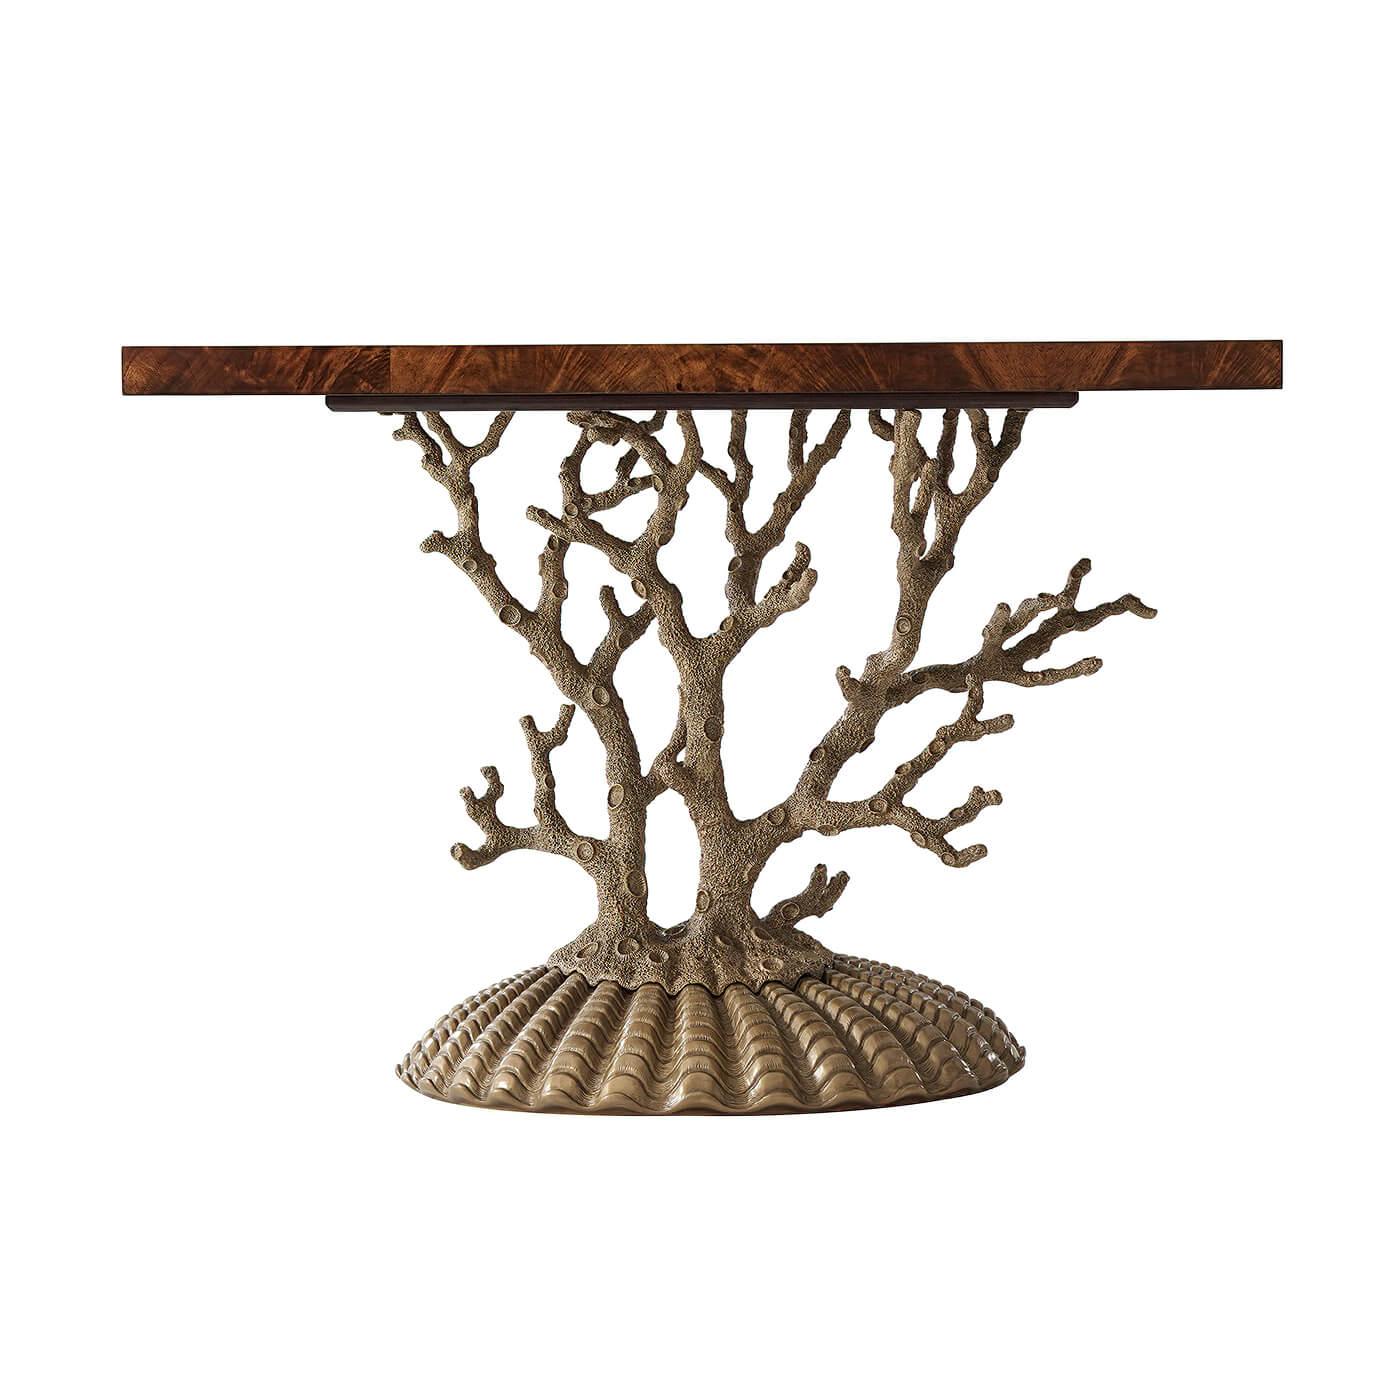 An unusual Grotto table, with a rectangular flame veneered mahogany top on a branching coral cast metal support and shell form cast metal base.

Dimensions: 48